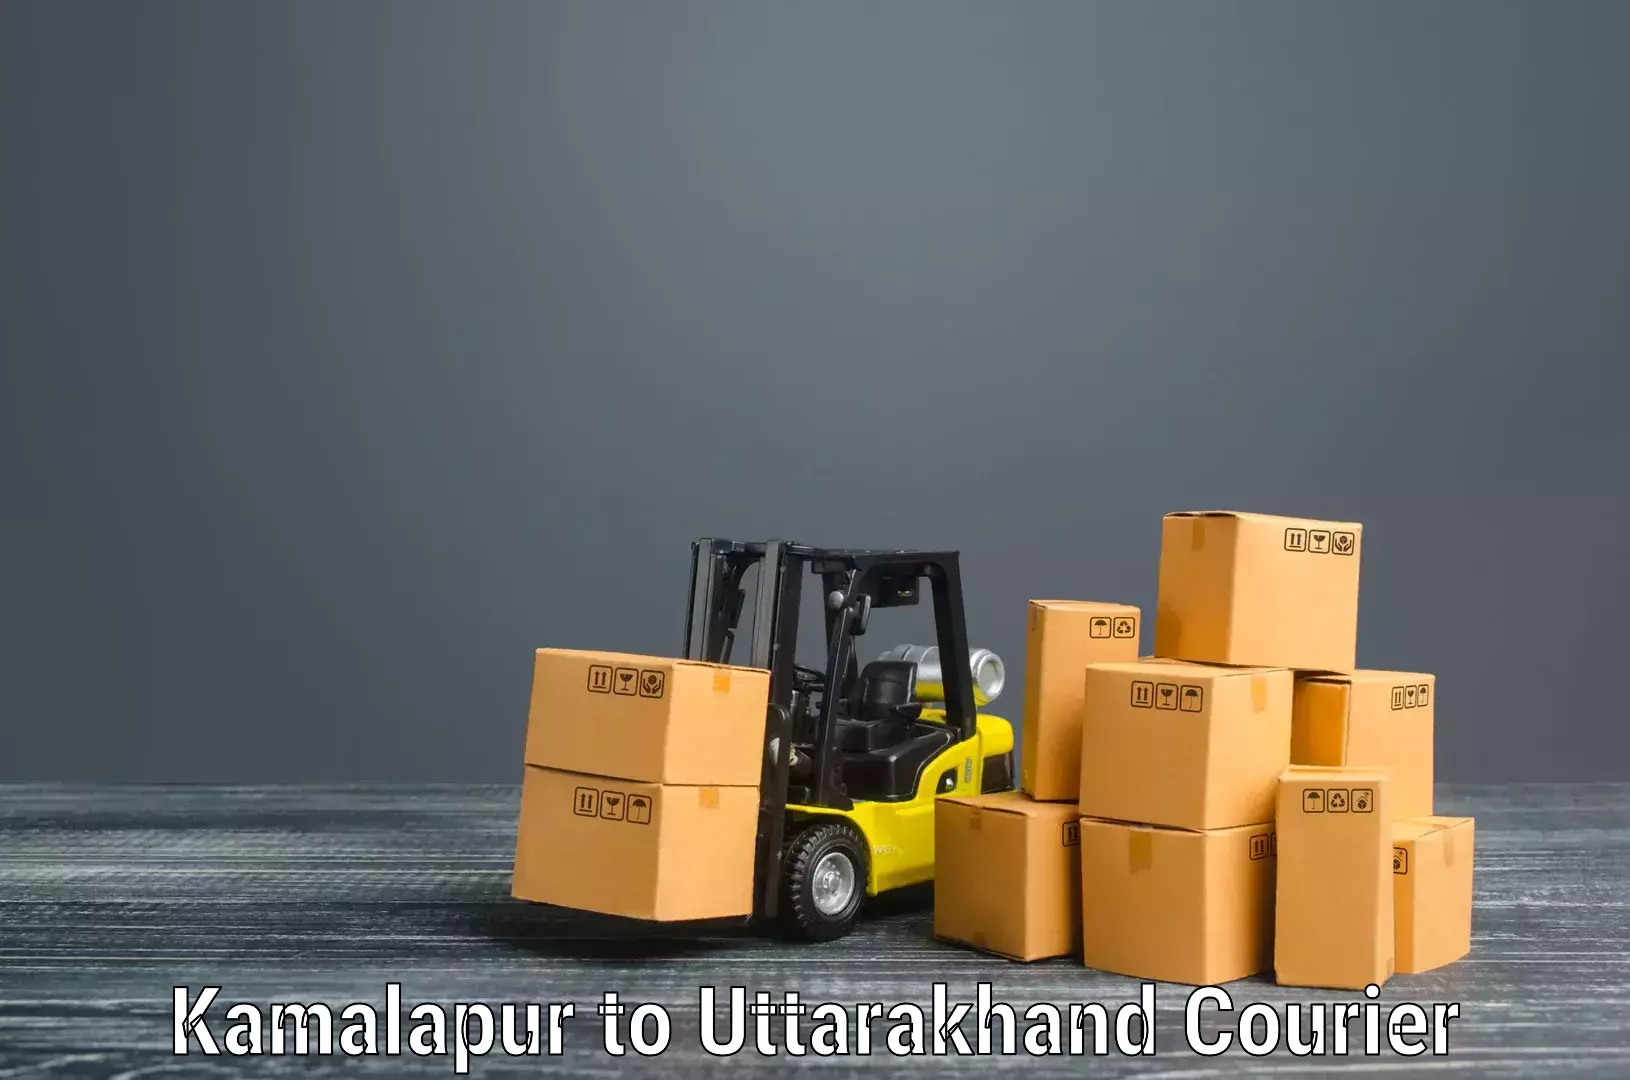 Moving and storage services in Kamalapur to Rudrapur